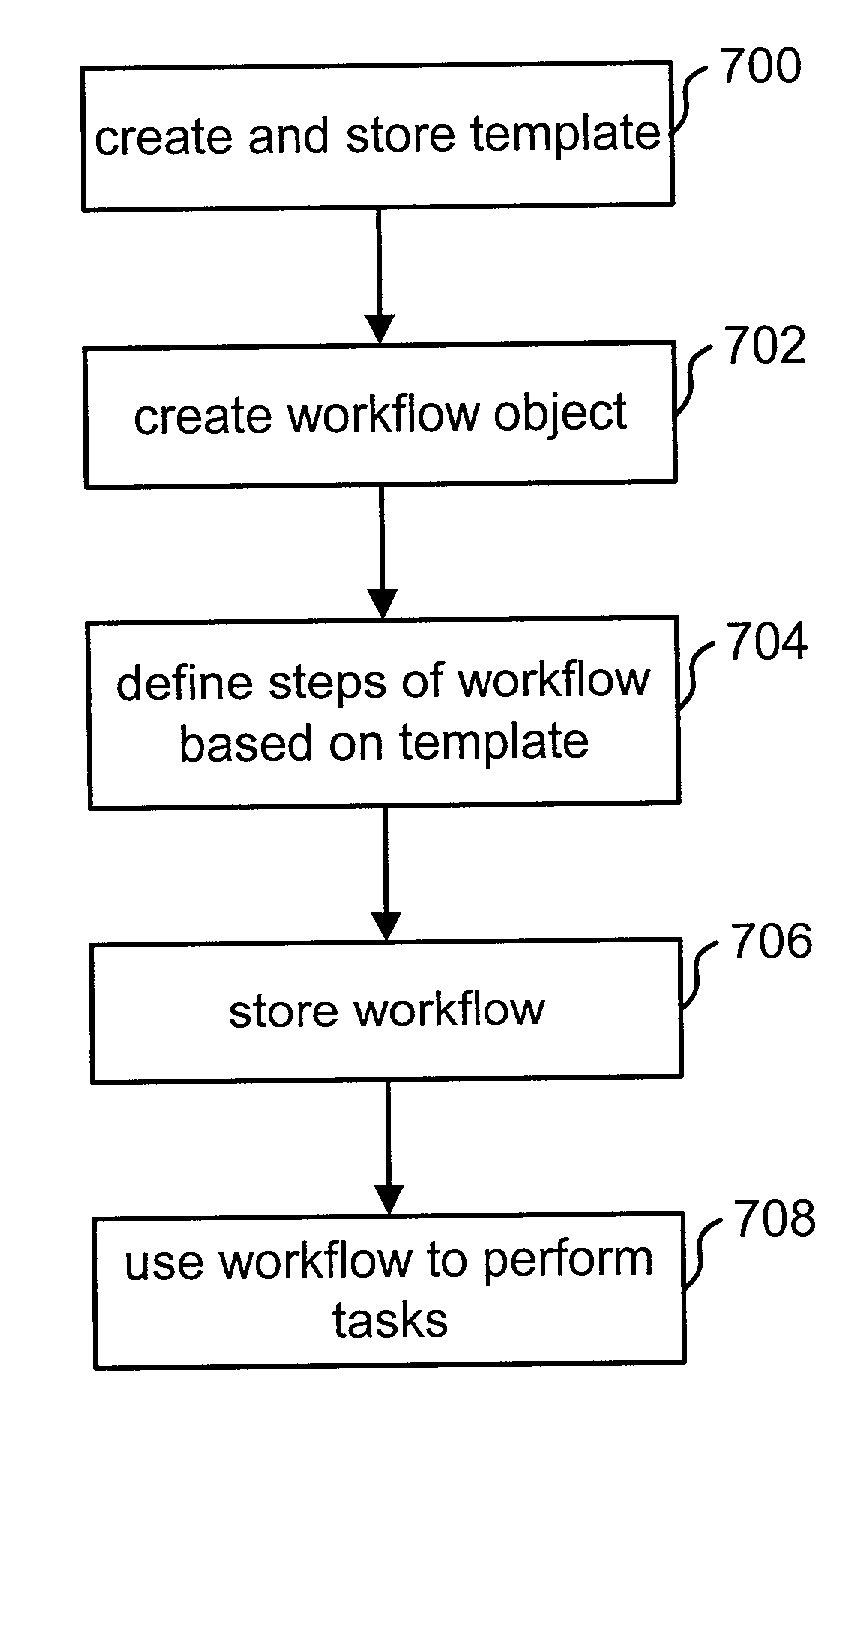 Workflows with associated processes